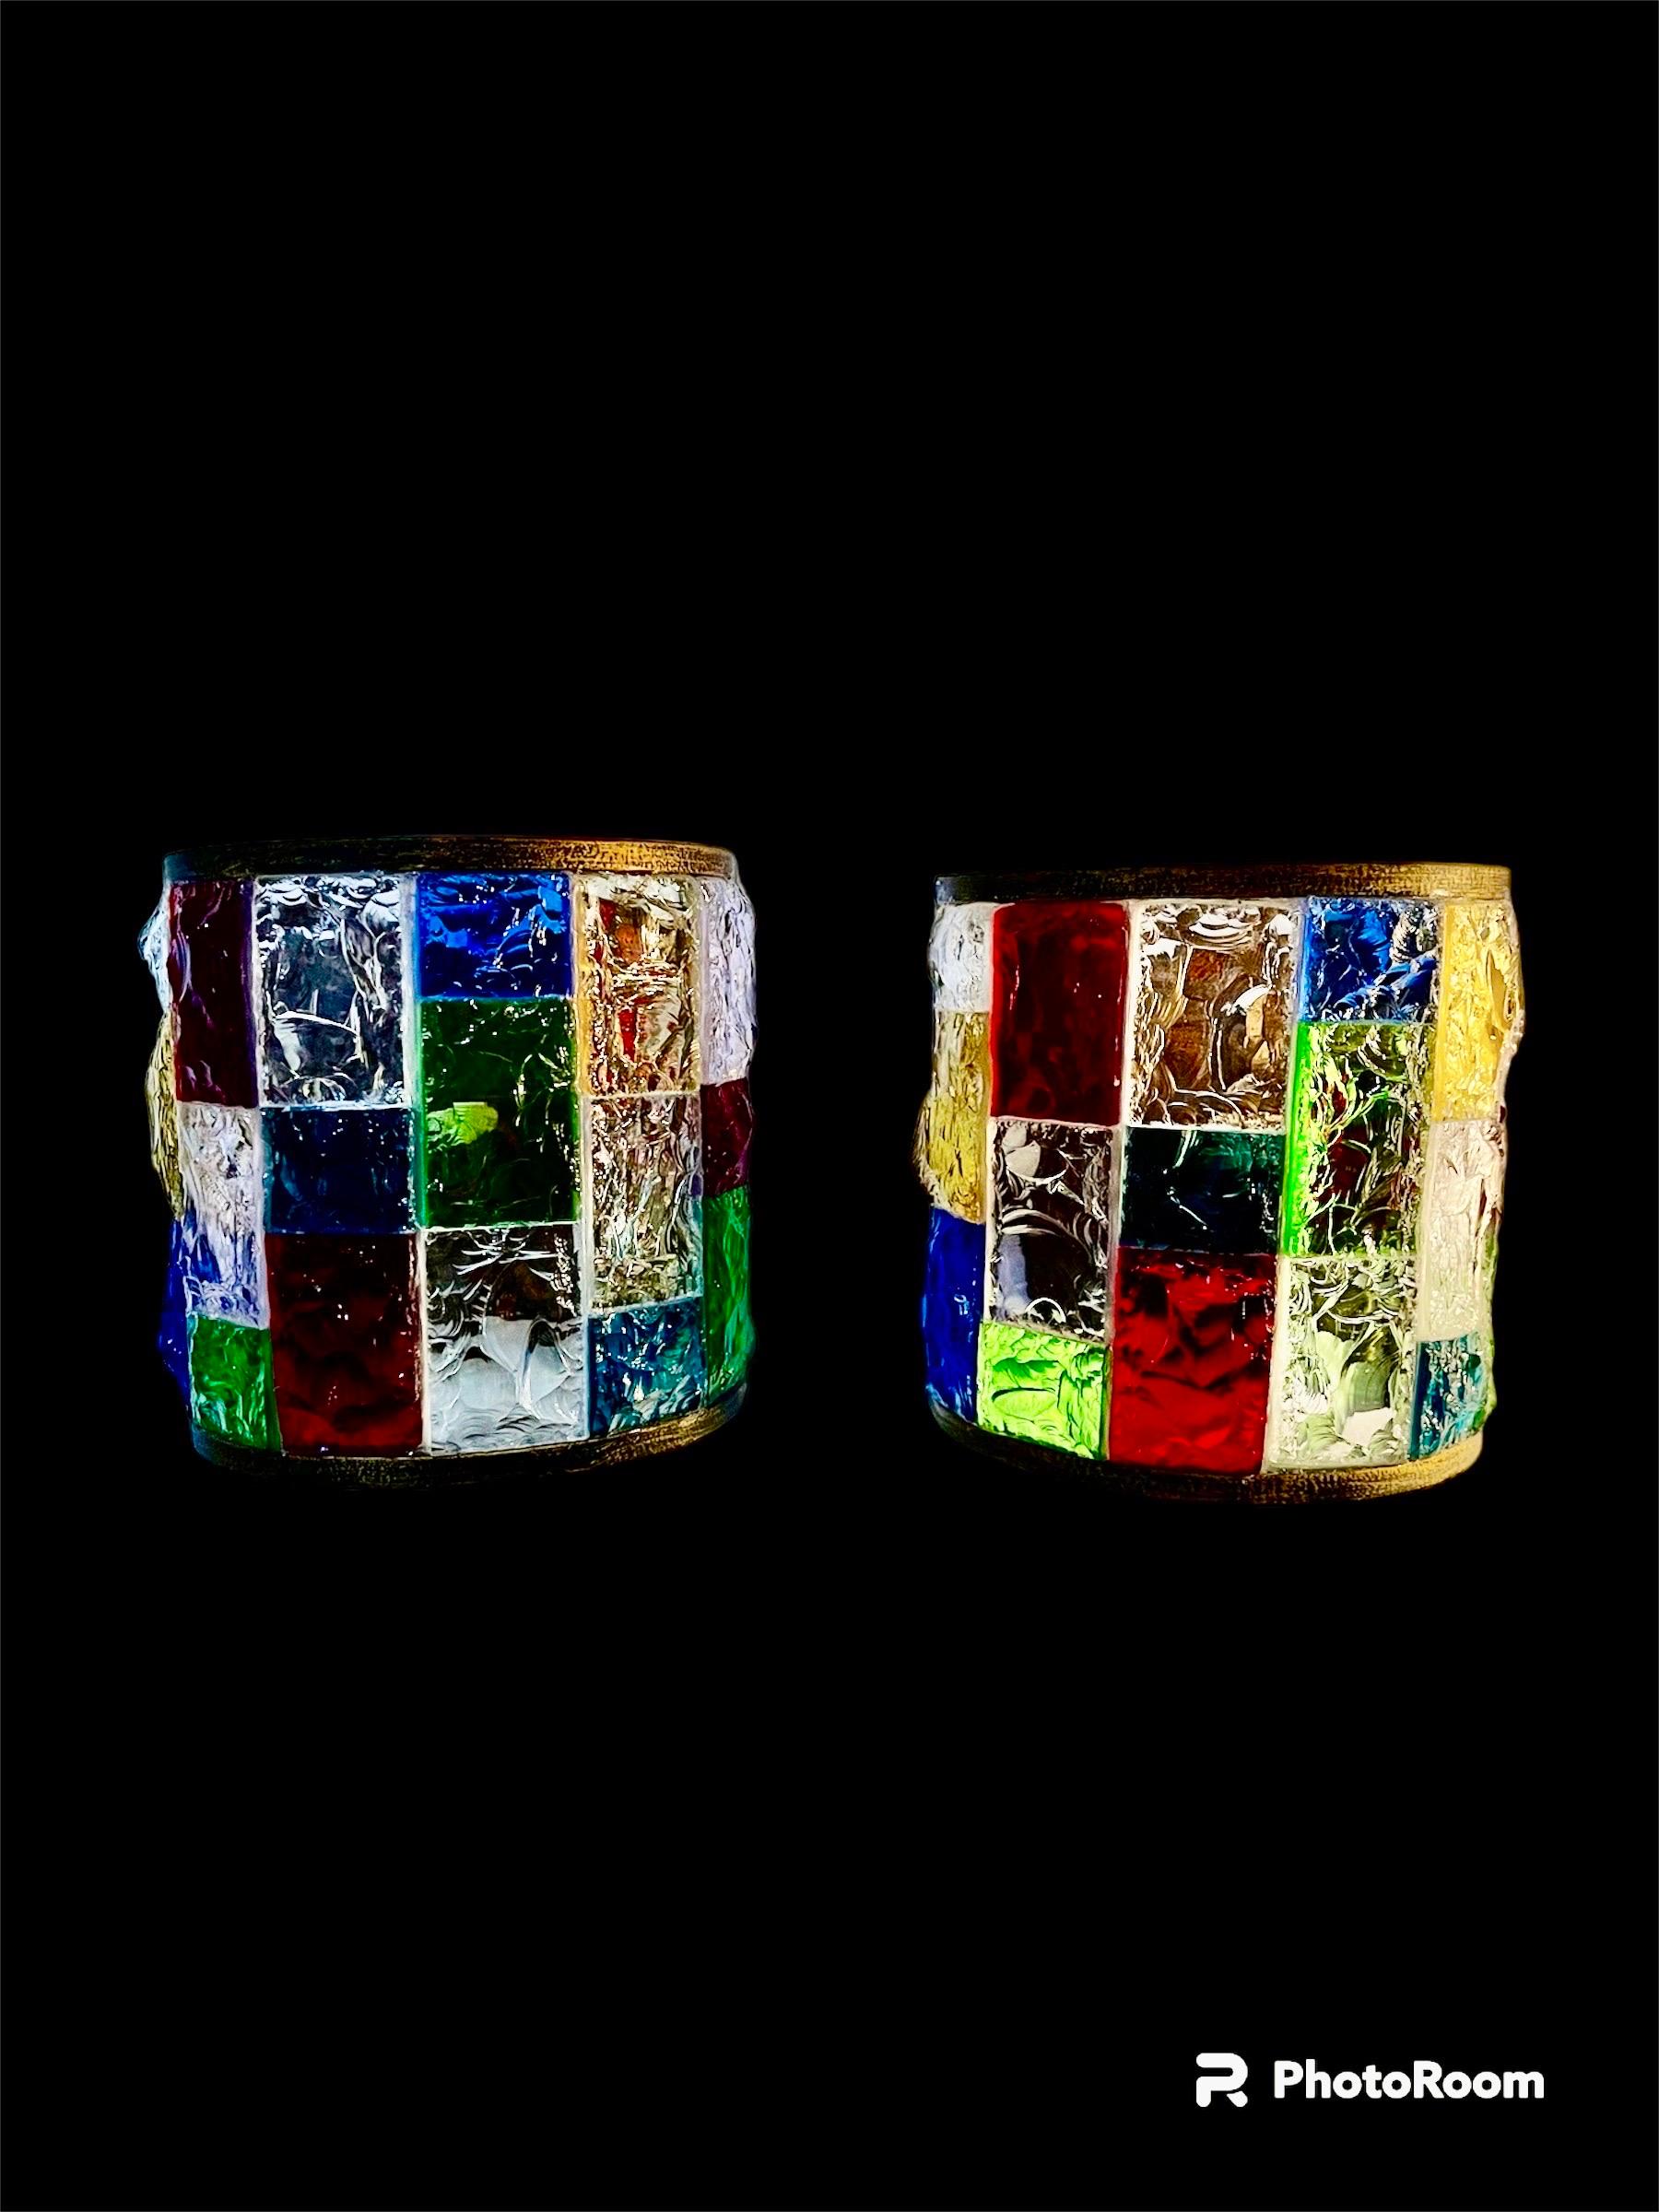 Superbe wall lighting multicolore glass Murano with brutalisat iron structure . The Design and the quality of the glass make this piece the best of the italian Design .
This unique paire of wall lighting in multicolore glass murano are exceptional